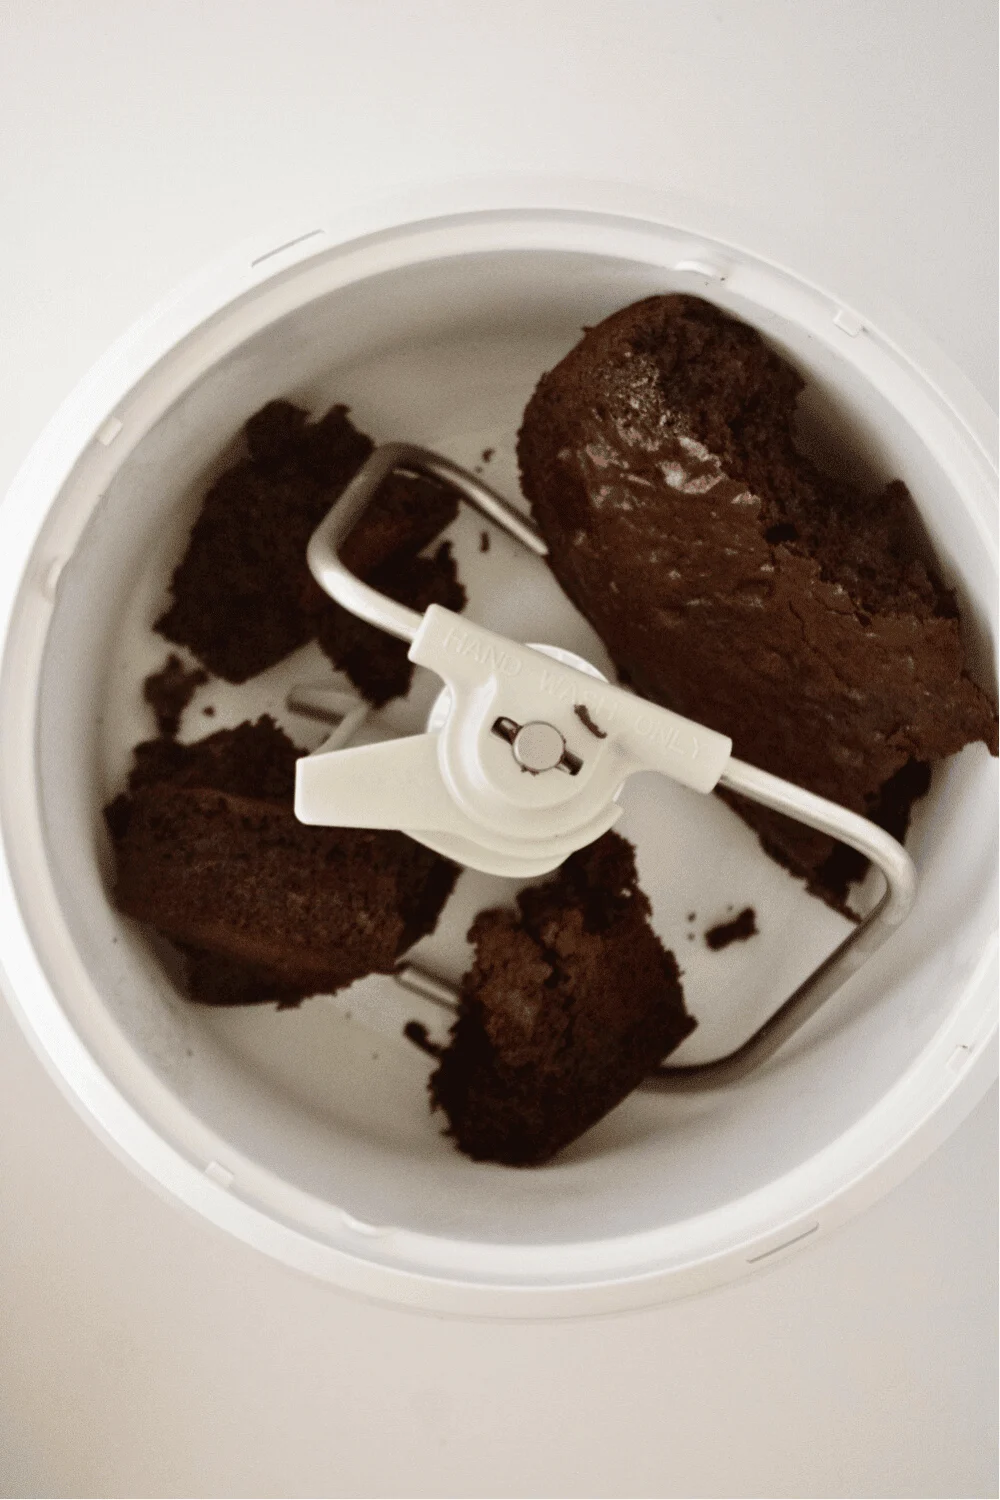 Blending warm cake in a stand mixer to make cake pop dough.